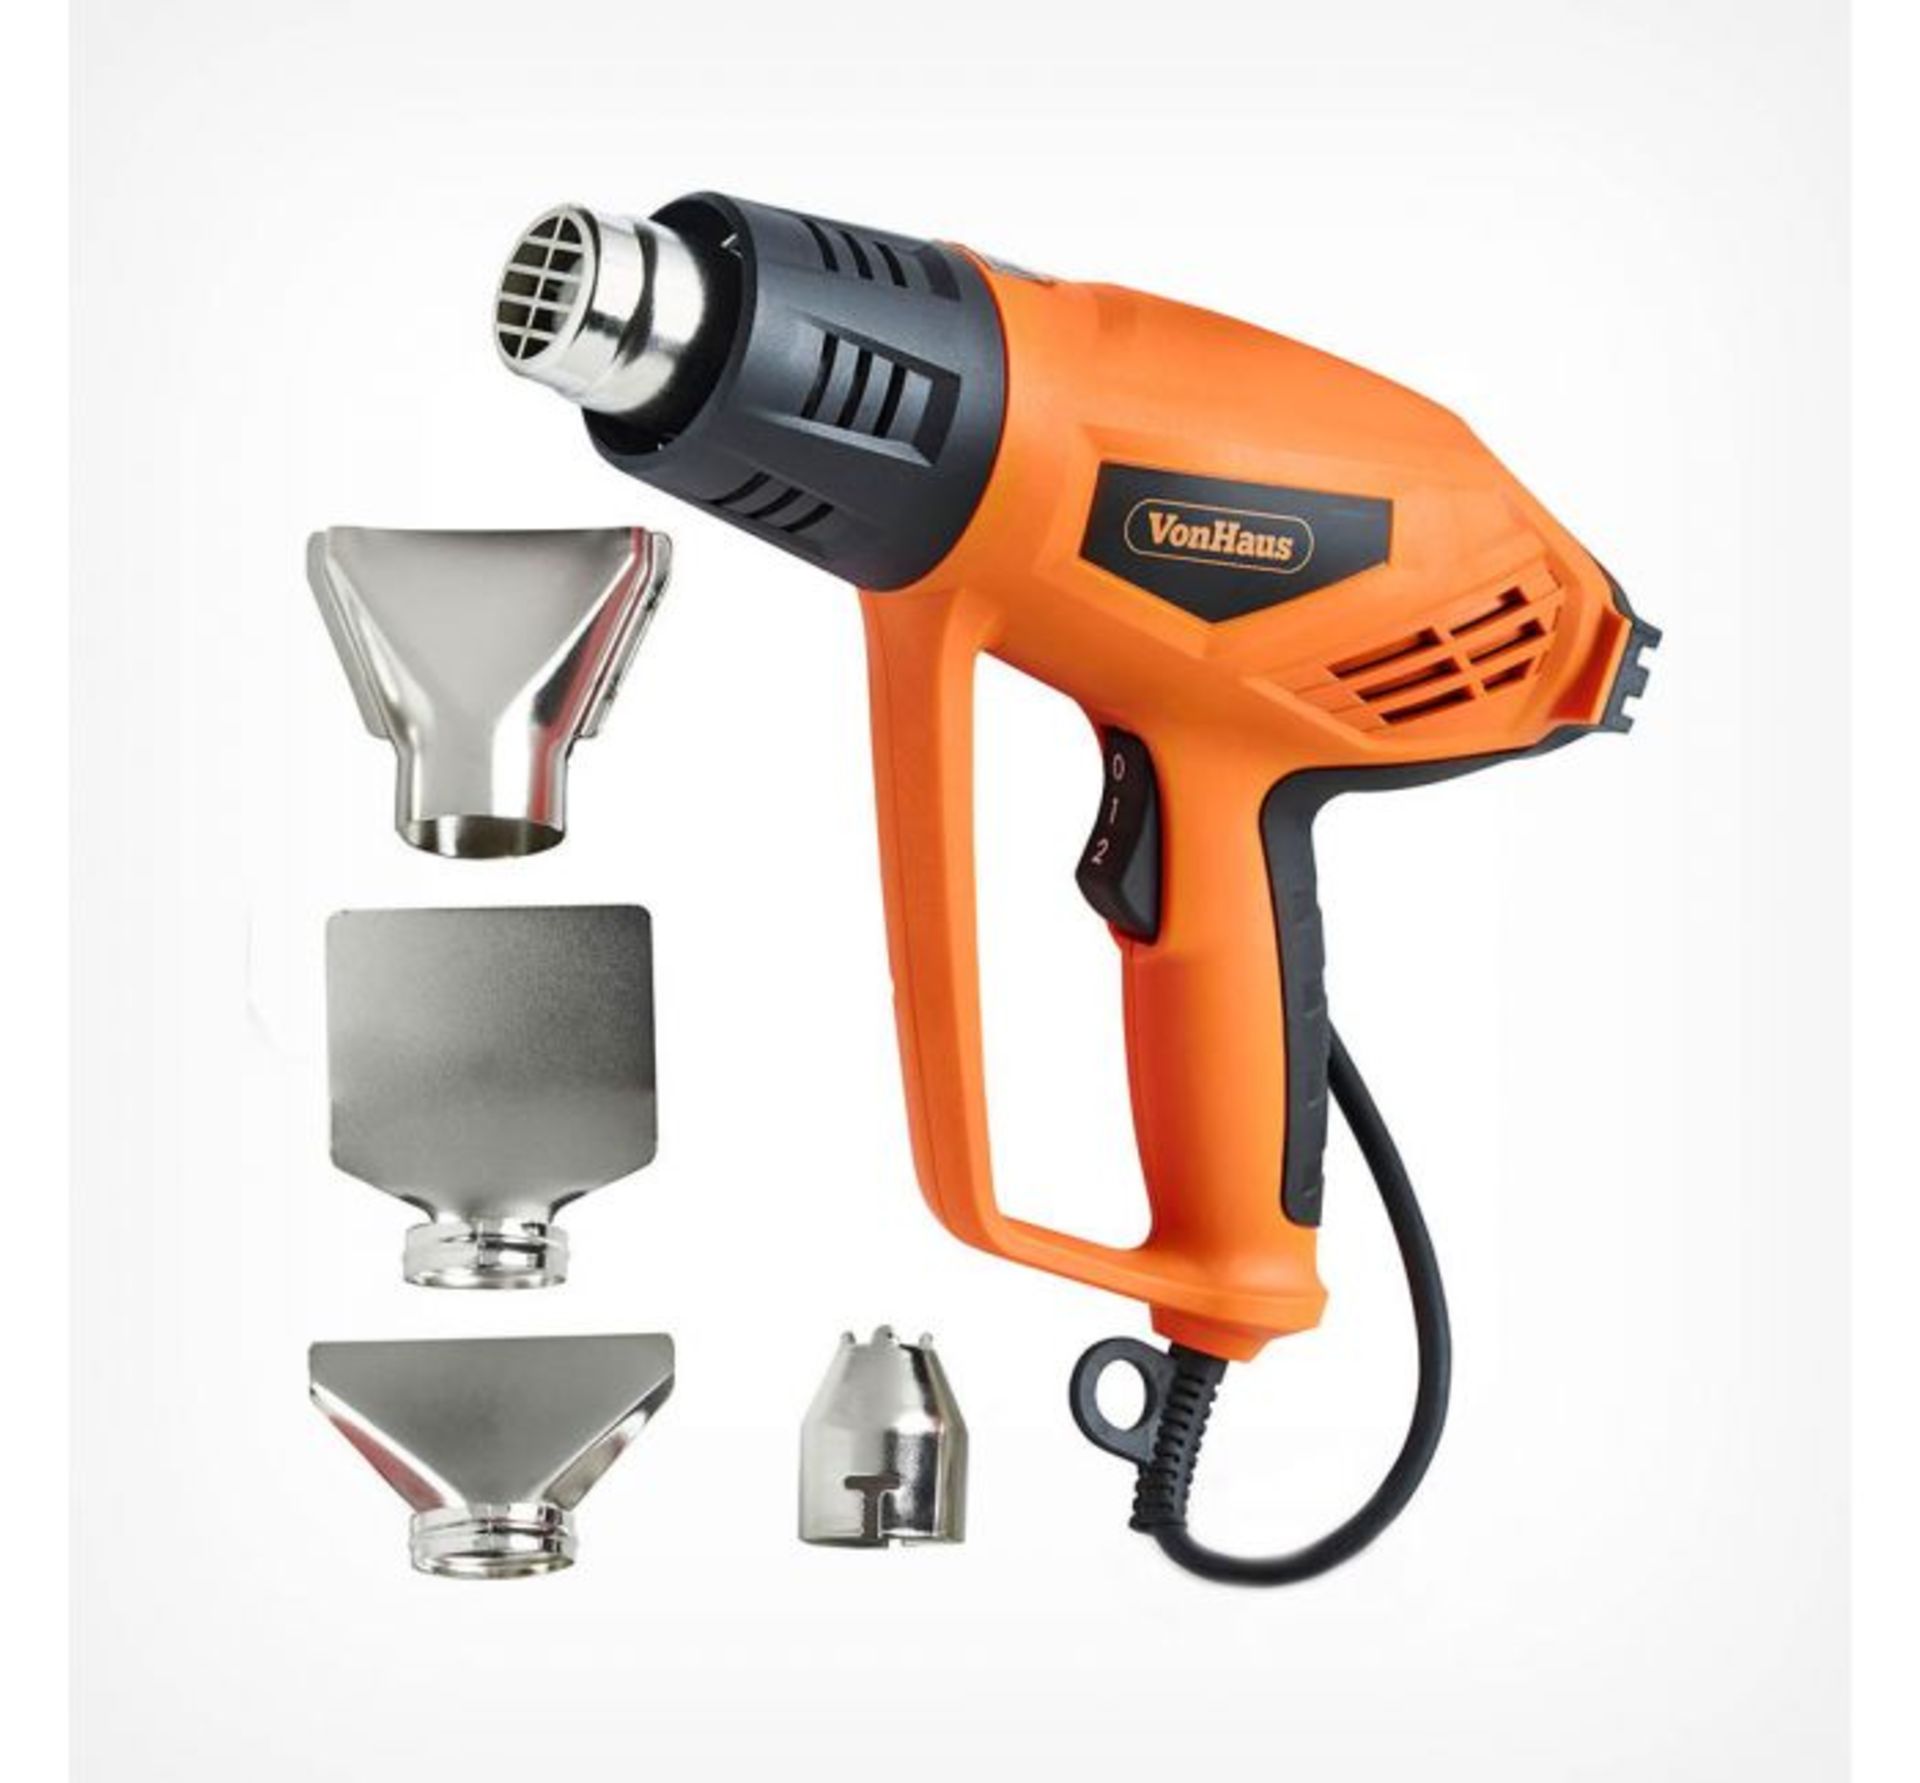 (JH56) 2000W Heat Gun Ideal for DIY projects, bending copper pipes, loosening rusted bolts, li... - Image 2 of 3